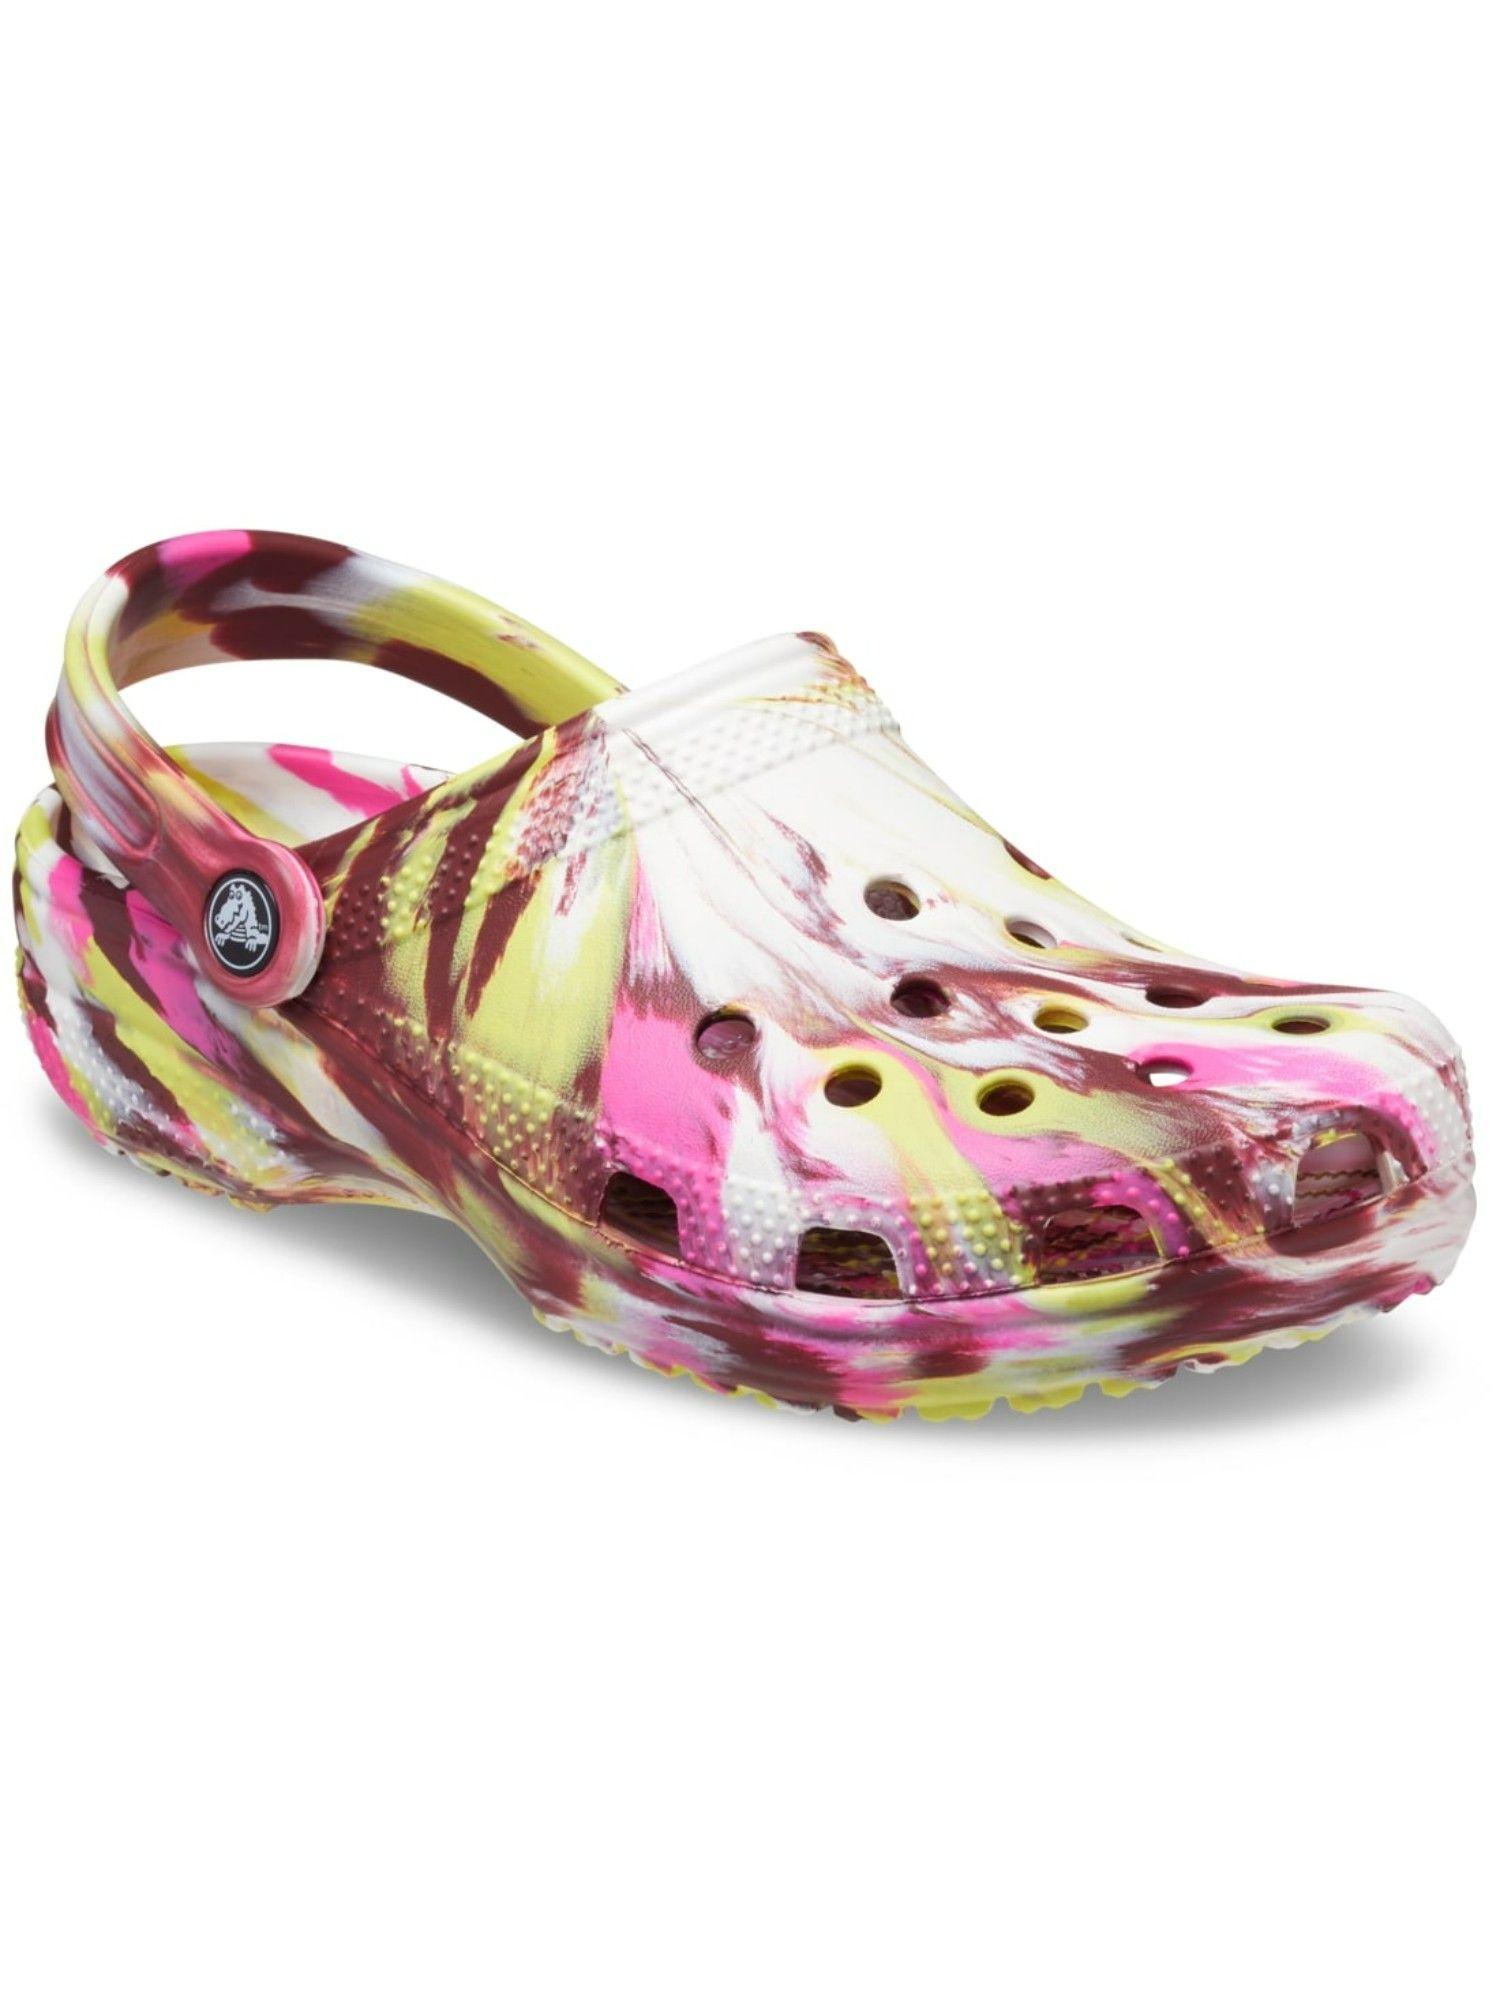 classic multi color unisex adults printed clog